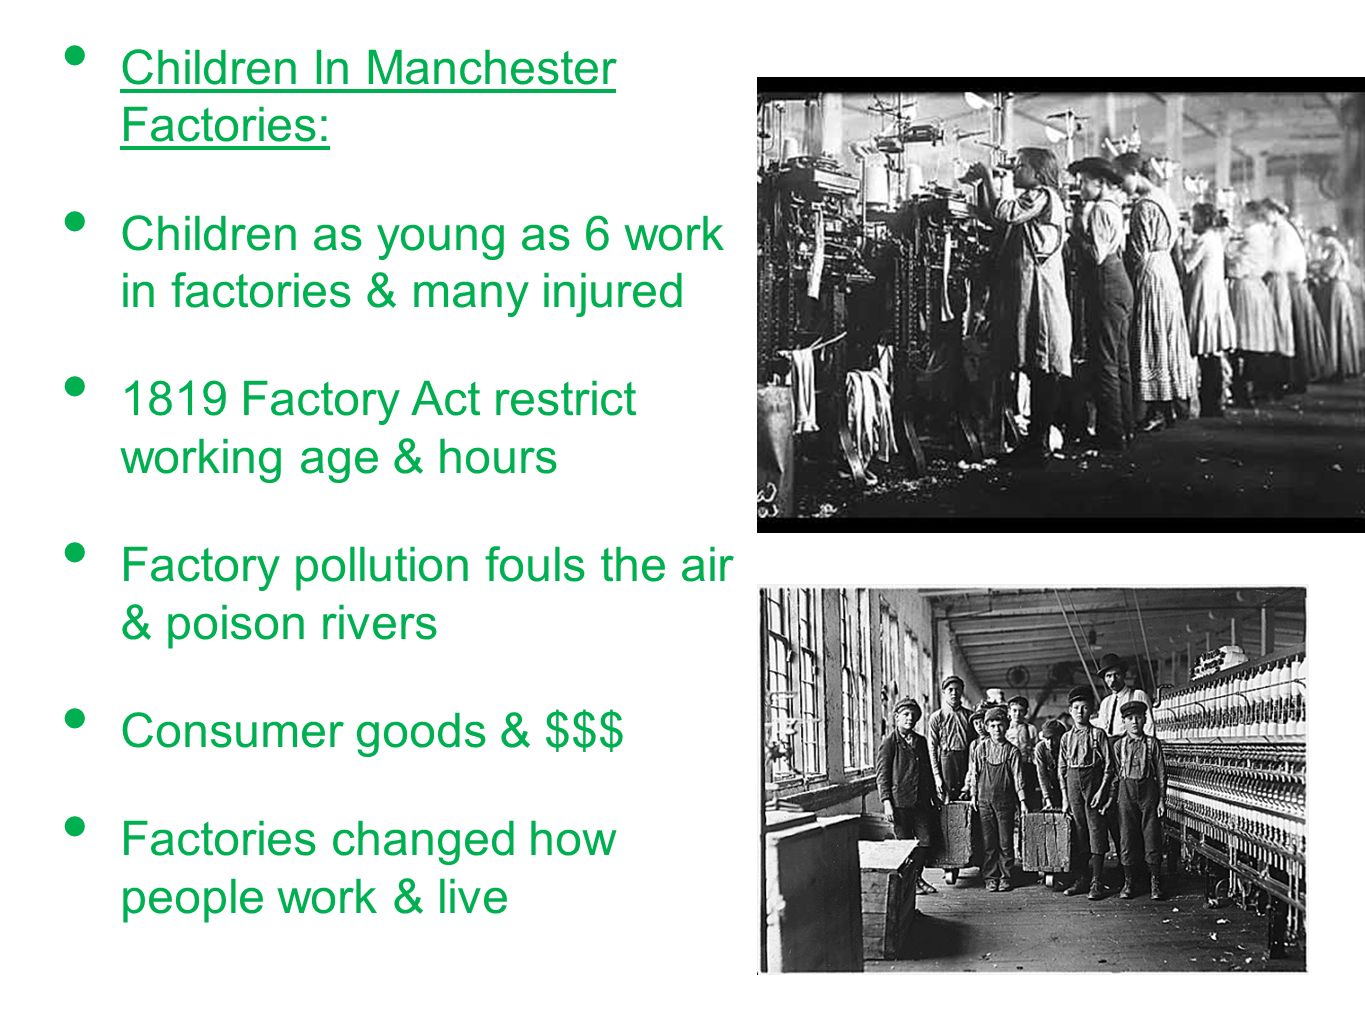 Children In Manchester Factories: Children as young as 6 work in factories & many injured 1819 Factory Act restrict working age & hours Factory pollution fouls the air & poison rivers Consumer goods & $$$ Factories changed how people work & live work